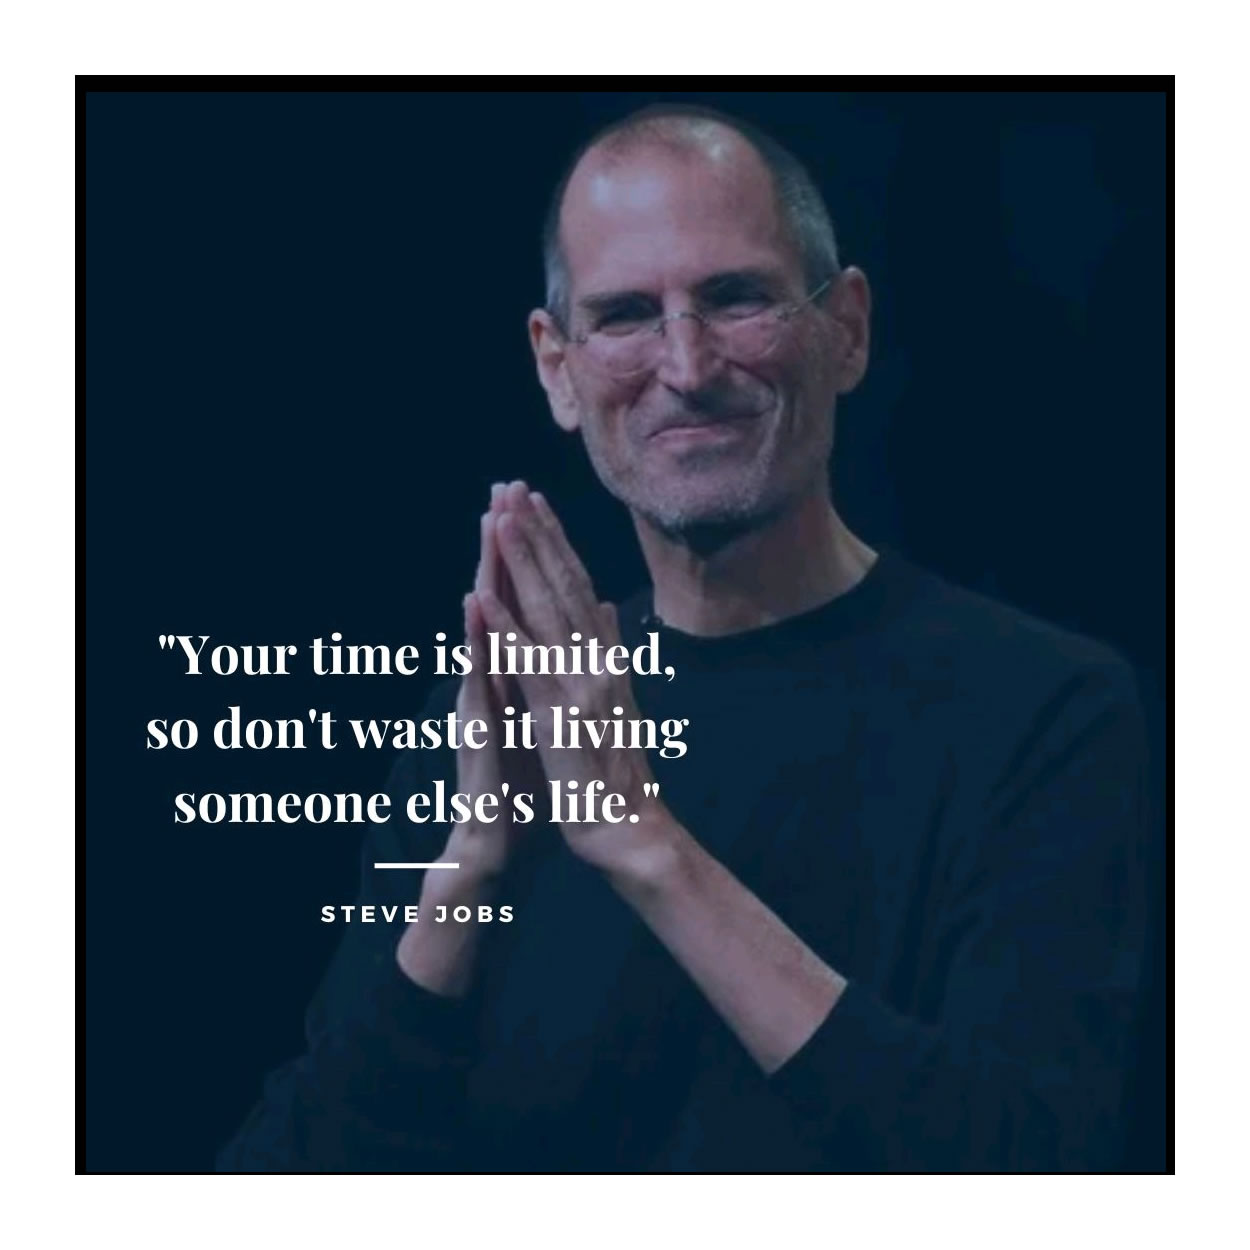 Your time is limited, so don't waste it living someone else's Life - Steve Jobs Quote - Let's Talk About It 